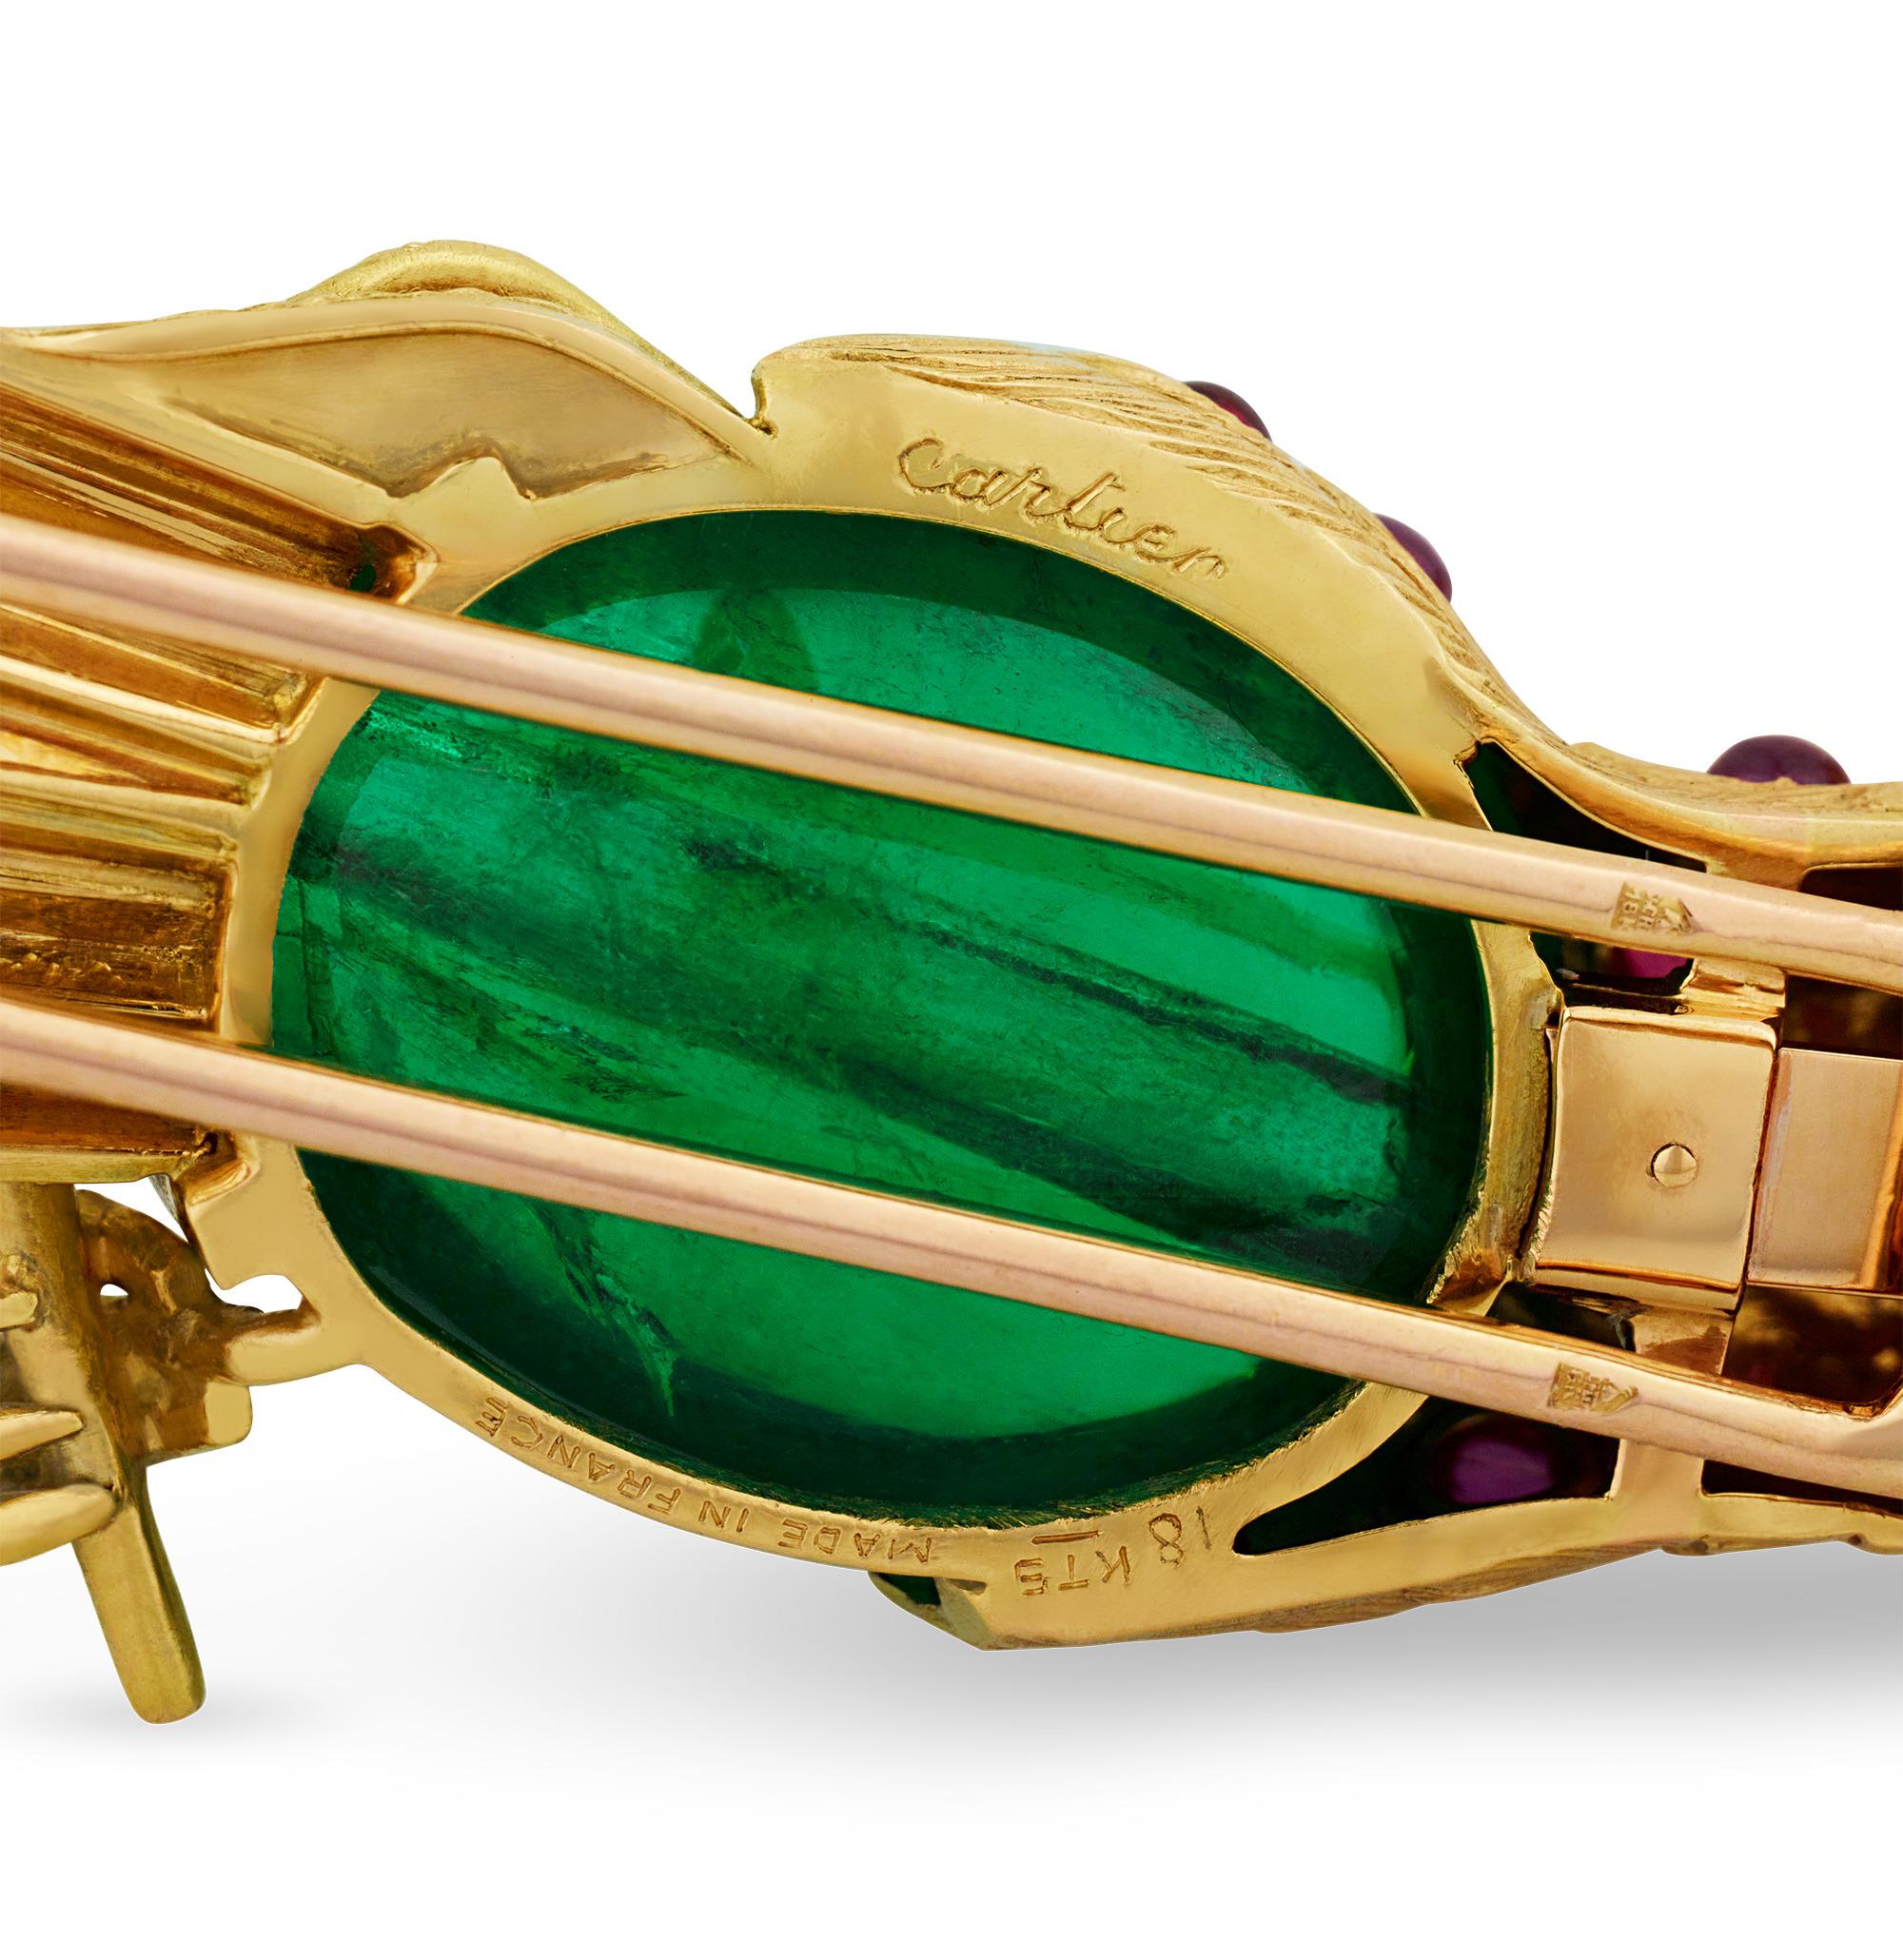 This magnificent brooch, crafted by the esteemed house of Cartier, features a bird exquisitely formed from a rare and large emerald bead certified by the Gübelin Gem Lab as Colombian in origin and measuring 26.50mm by 18.00mm, weighing approximately